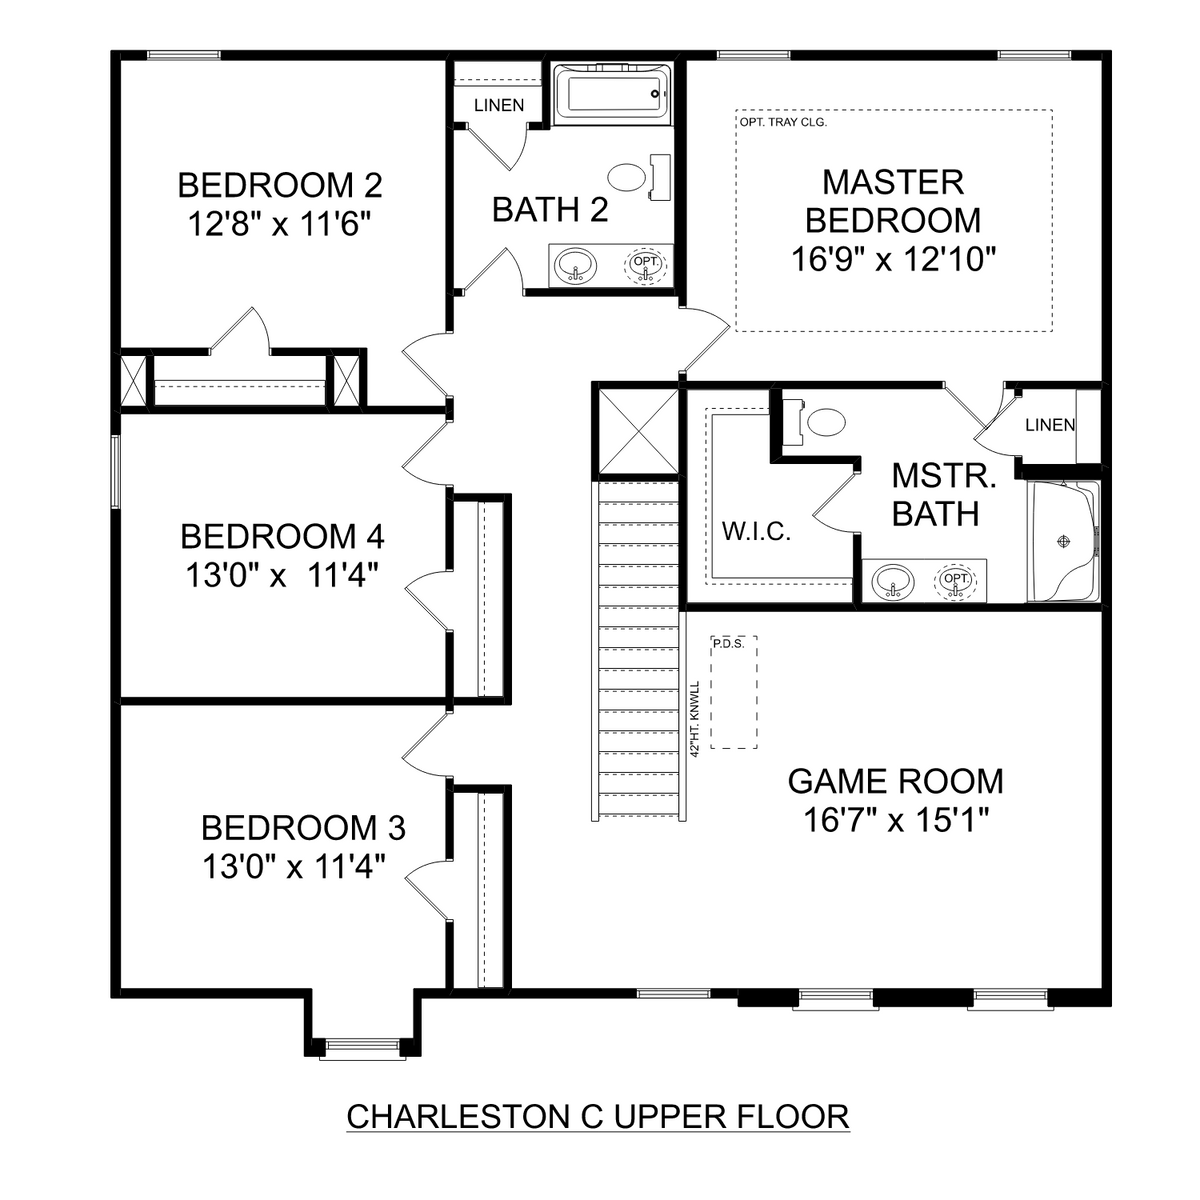 2 - The Charleston C floor plan layout for 4016 Rockland Circle SE in Davidson Homes' Monteagle Cove community.